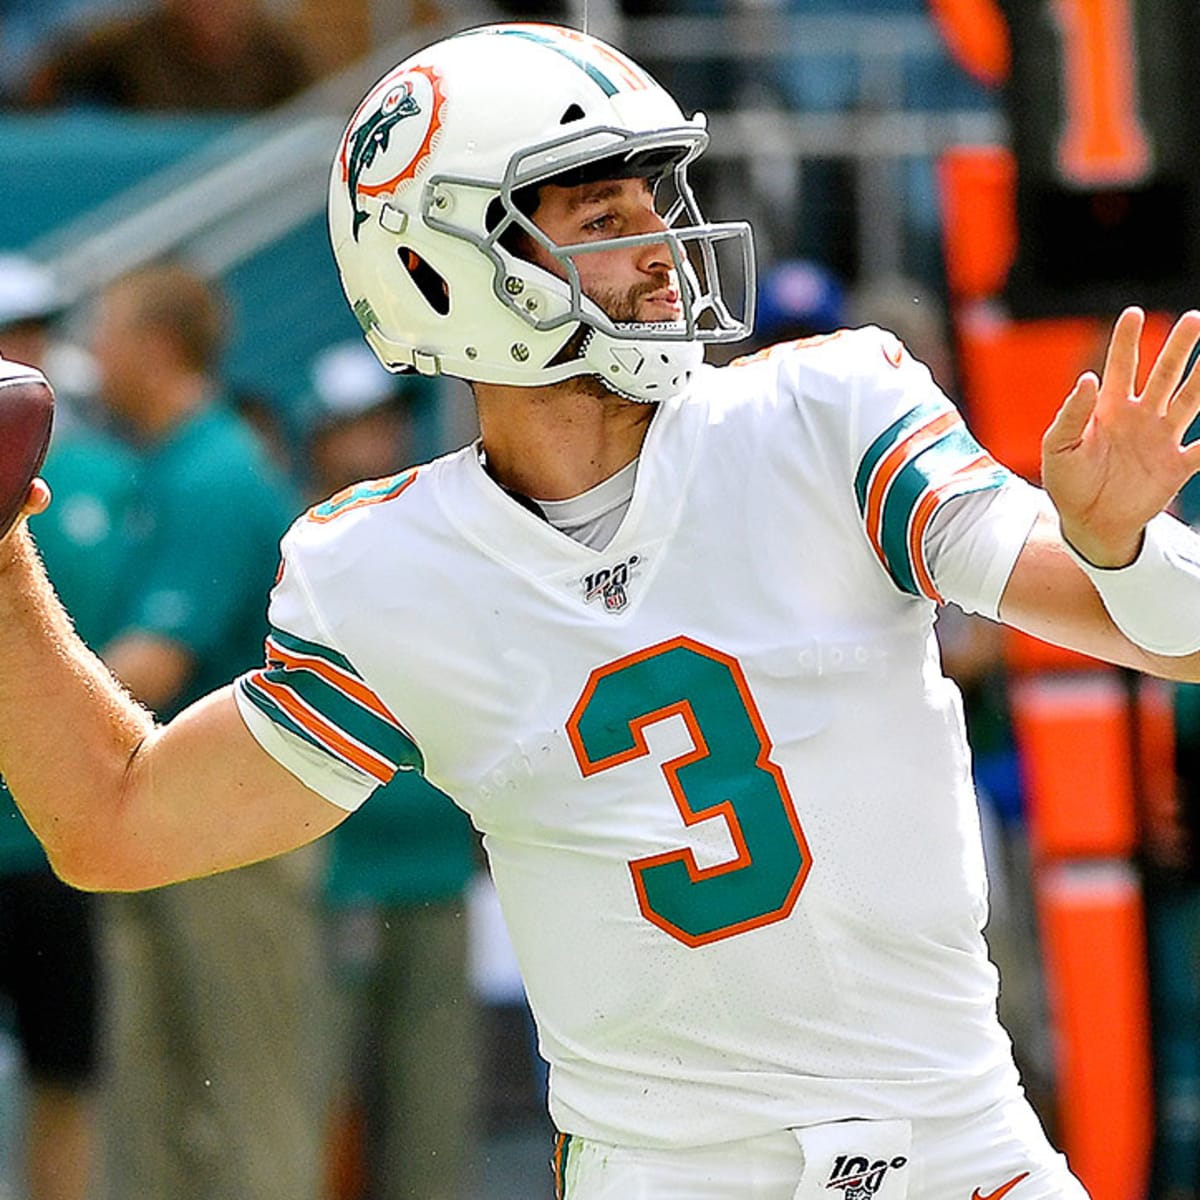 Sunday Playbook: Dolphins making surprising push toward top of AFC East